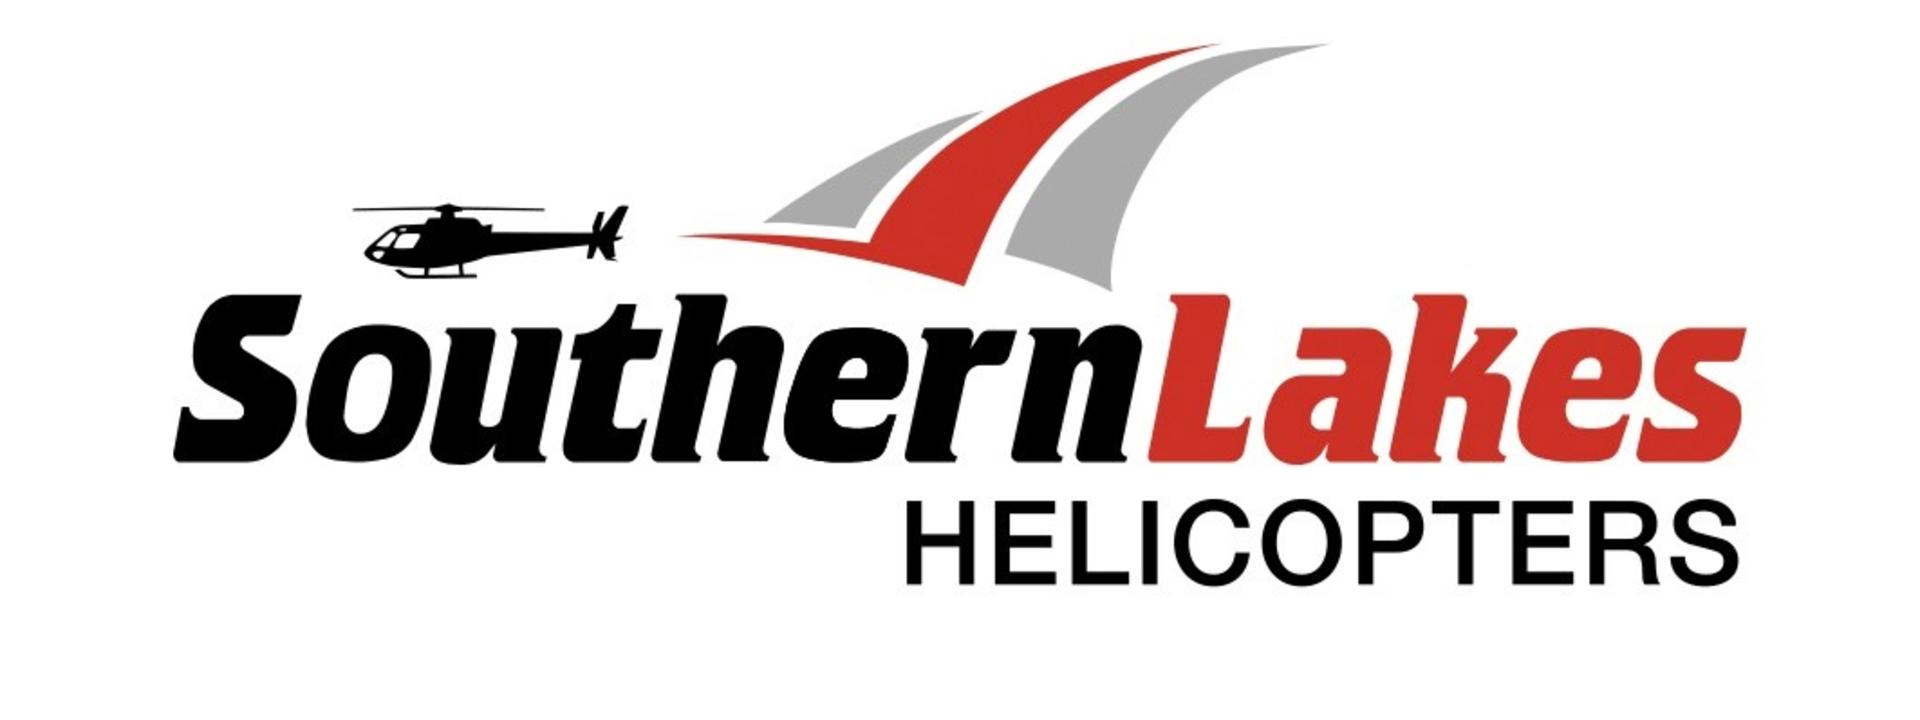 Logo: Southern Lakes Helicopters Ltd